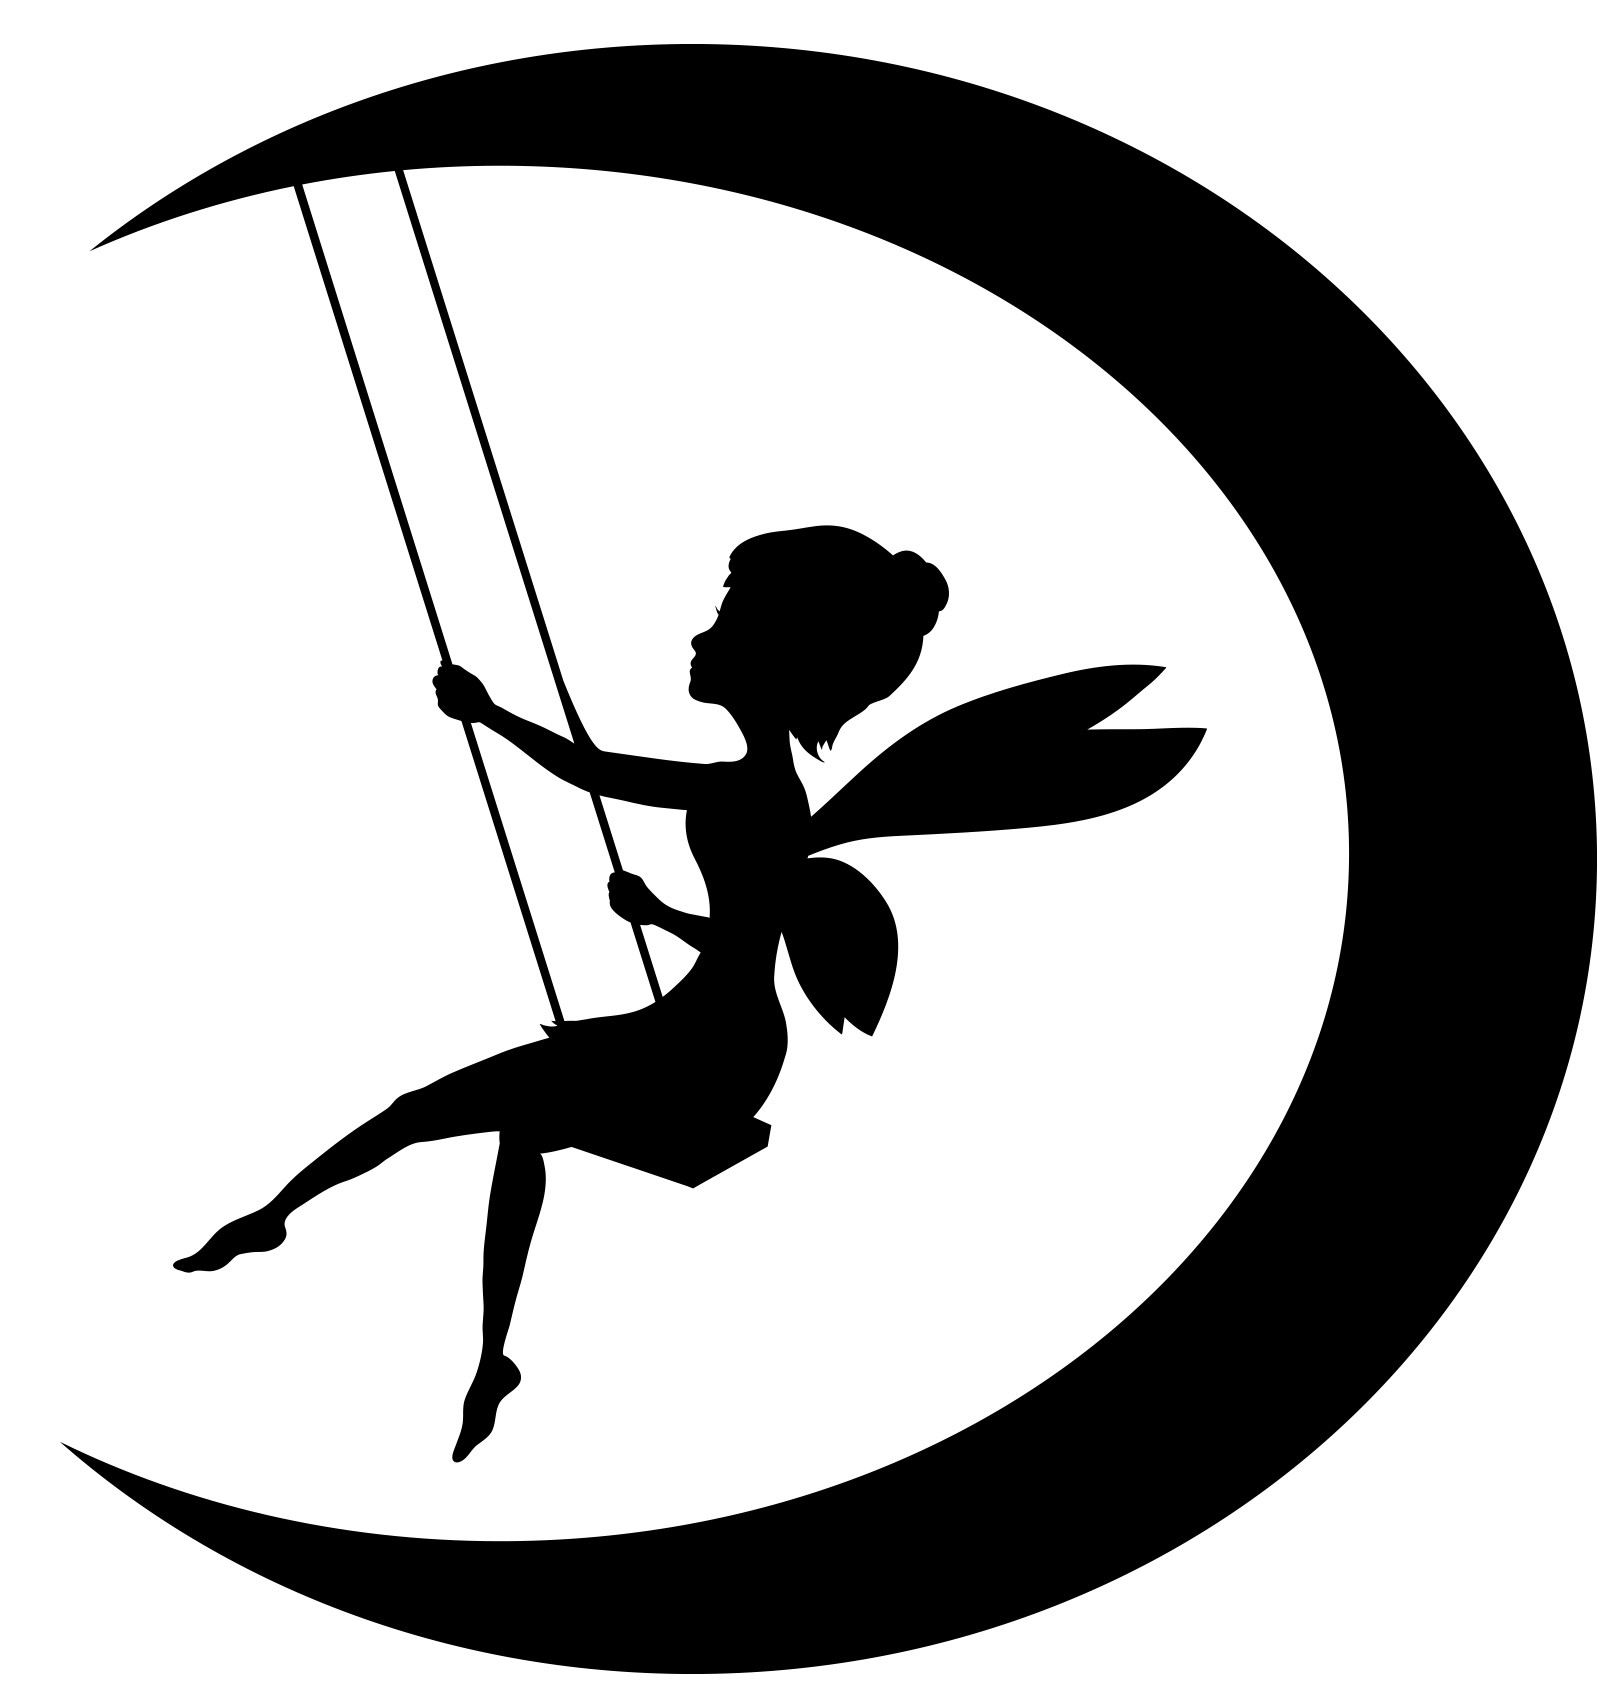 16 Silhouette Tinkerbell Free Cliparts That You Can Download To You